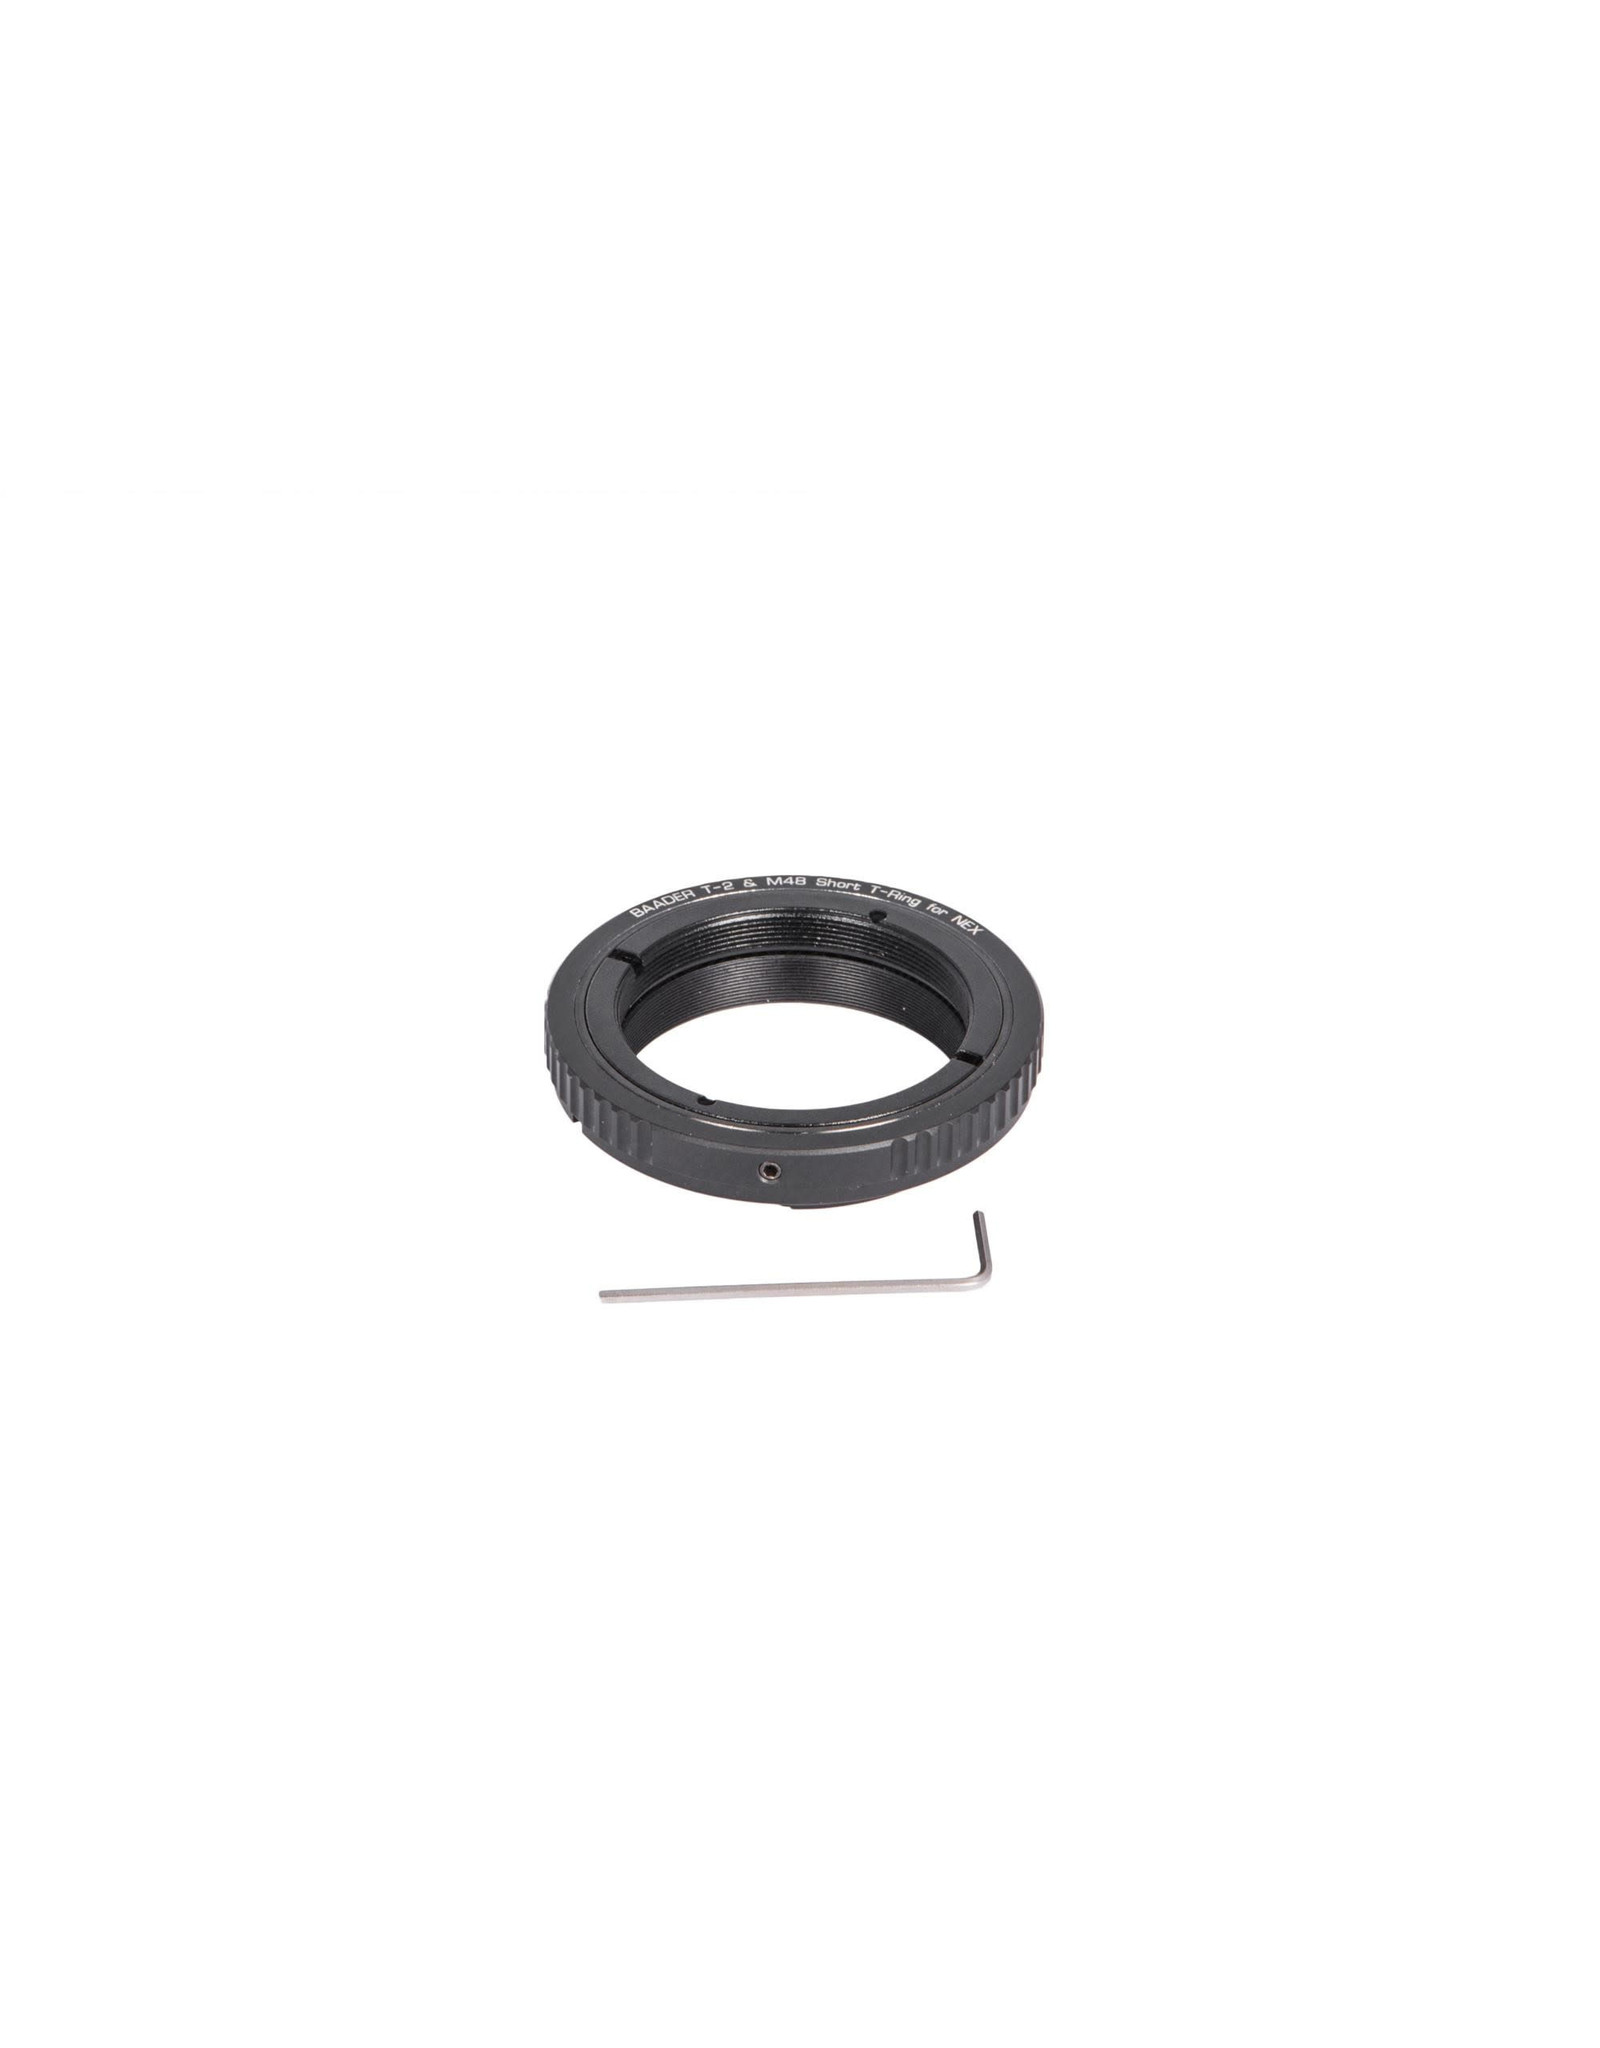 Baader Planetarium Baader T-Ring for Sony E/NEX Bayonet with D52/M48 to T2